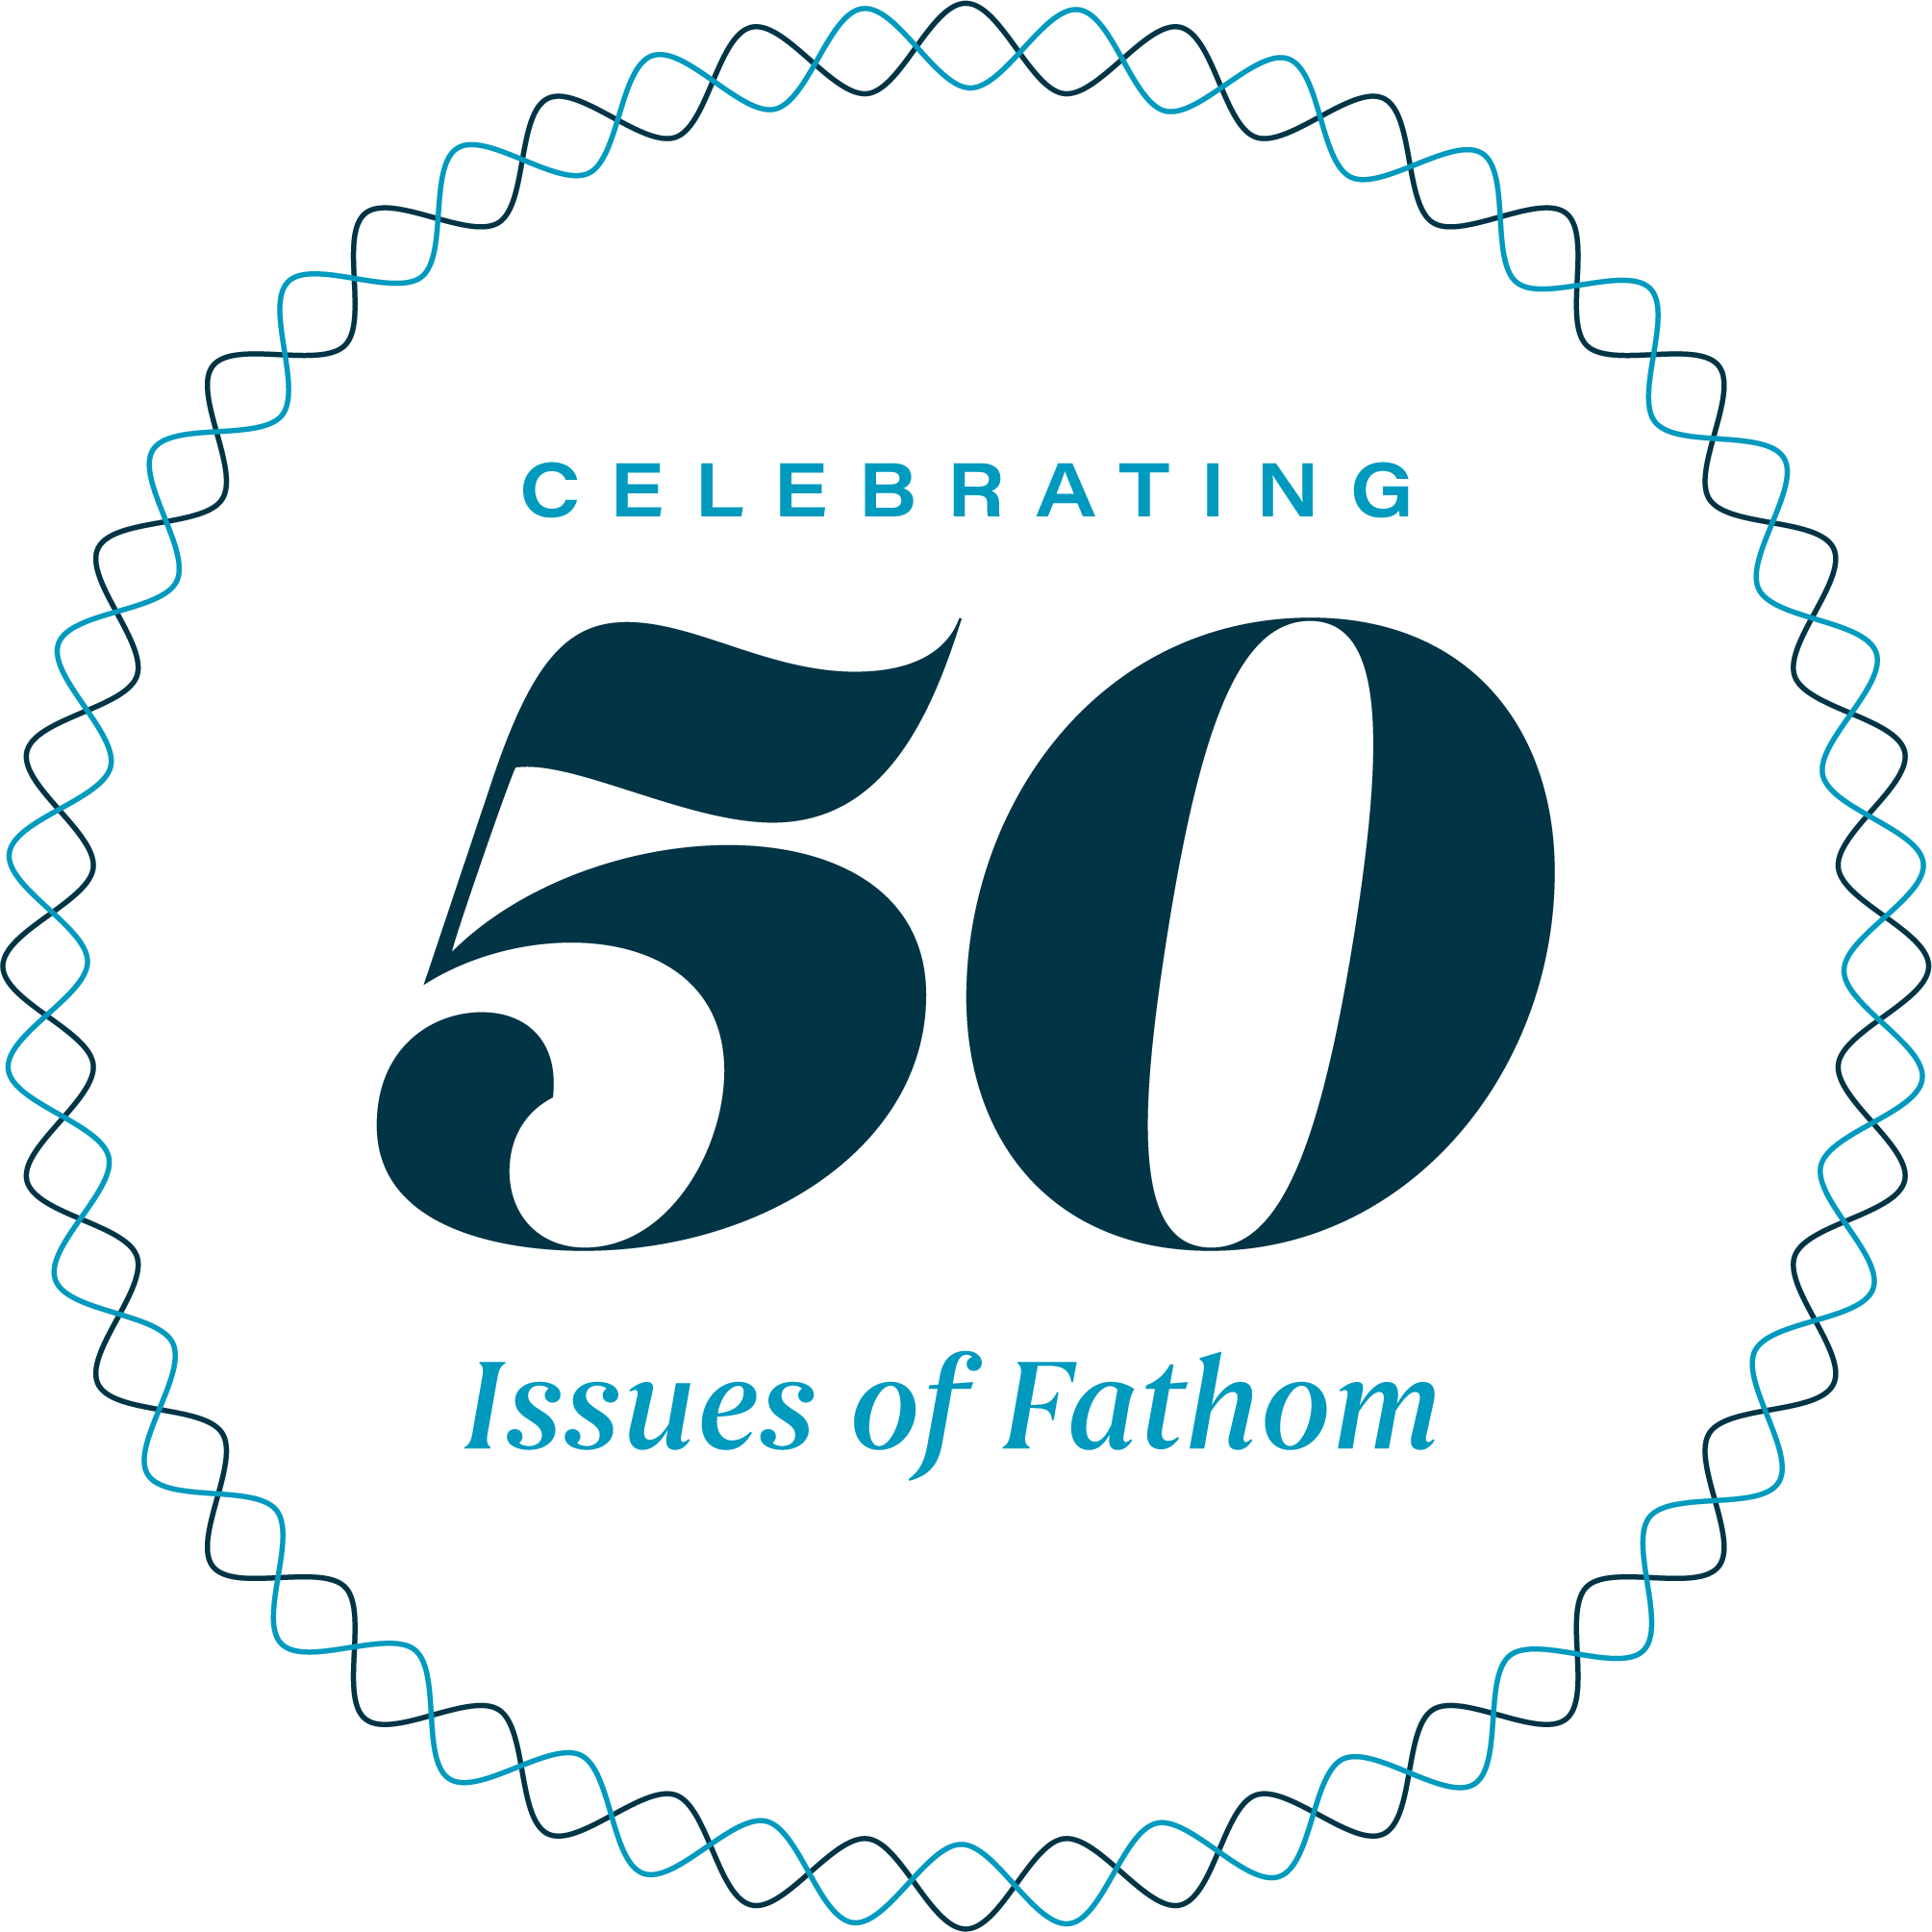 50 Issues of Fathom